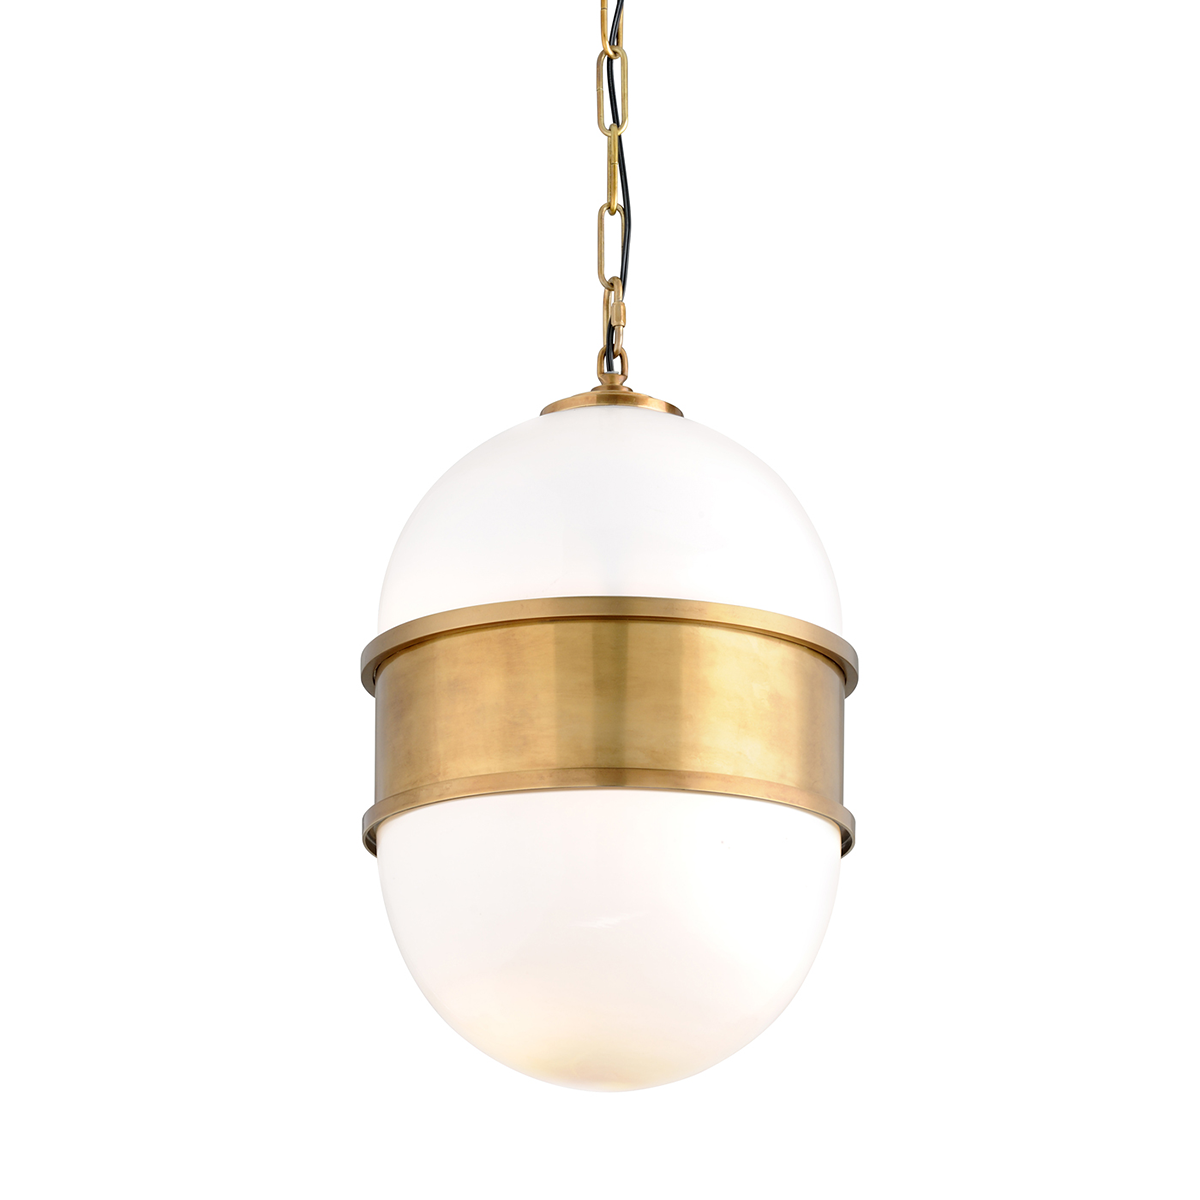 Hudson Valley Lighting Broomley Pendant Light in Solid Brass with Two Lights